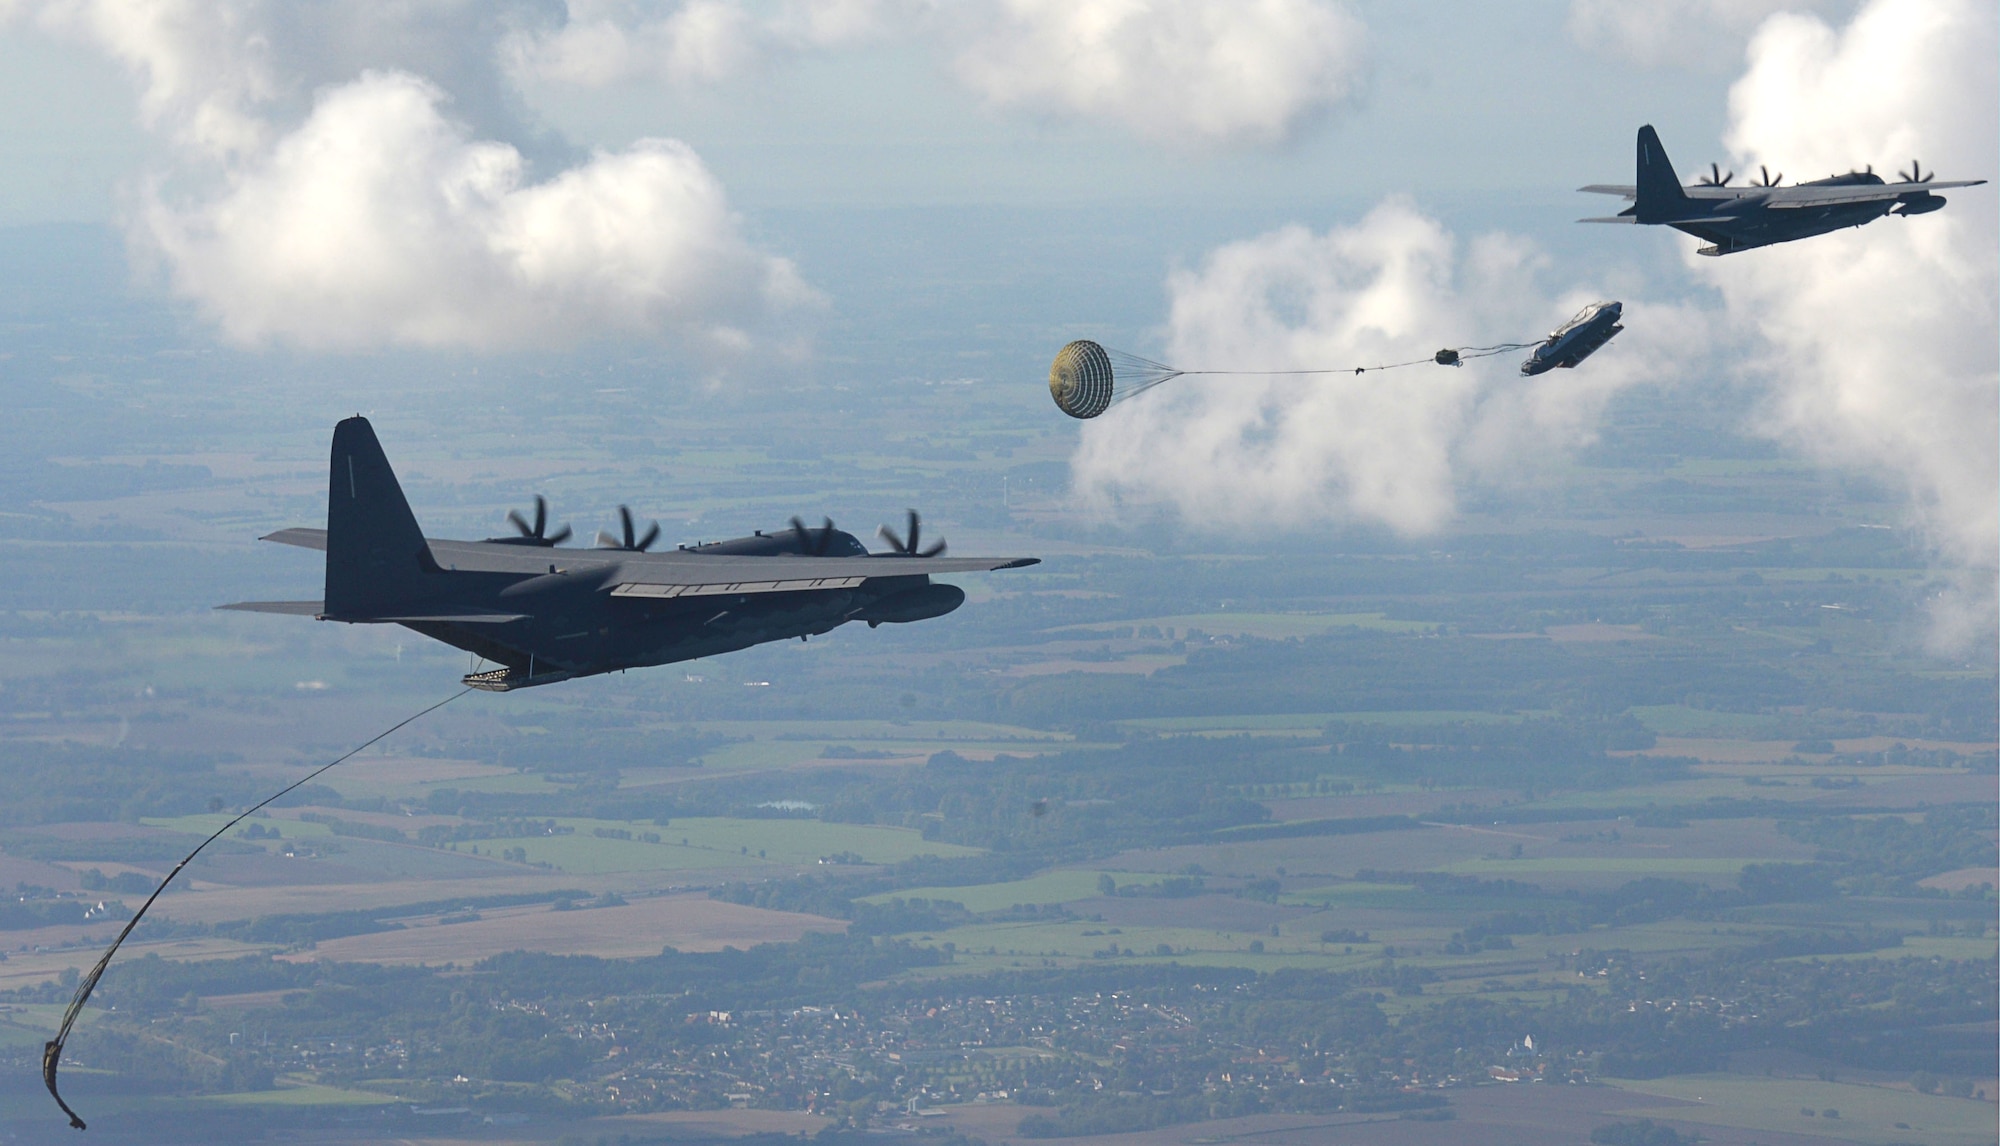 Two U.S. Air Force MC-130J Commando IIs perform Maritime Craft Aerial Delivery System drops over the Little Belt Strait in Denmark Sept. 27, 2016. After the Rigid inflatable Boats were deployed, U.S. Navy Special Warfare Combatant-Craft crewmen followed to set up the equipment. Finally, a third aircraft off loaded U.S. Air Force and Danish air commandos at the drop zone. (U.S. Air Force photo by Senior Airman Justine Rho)